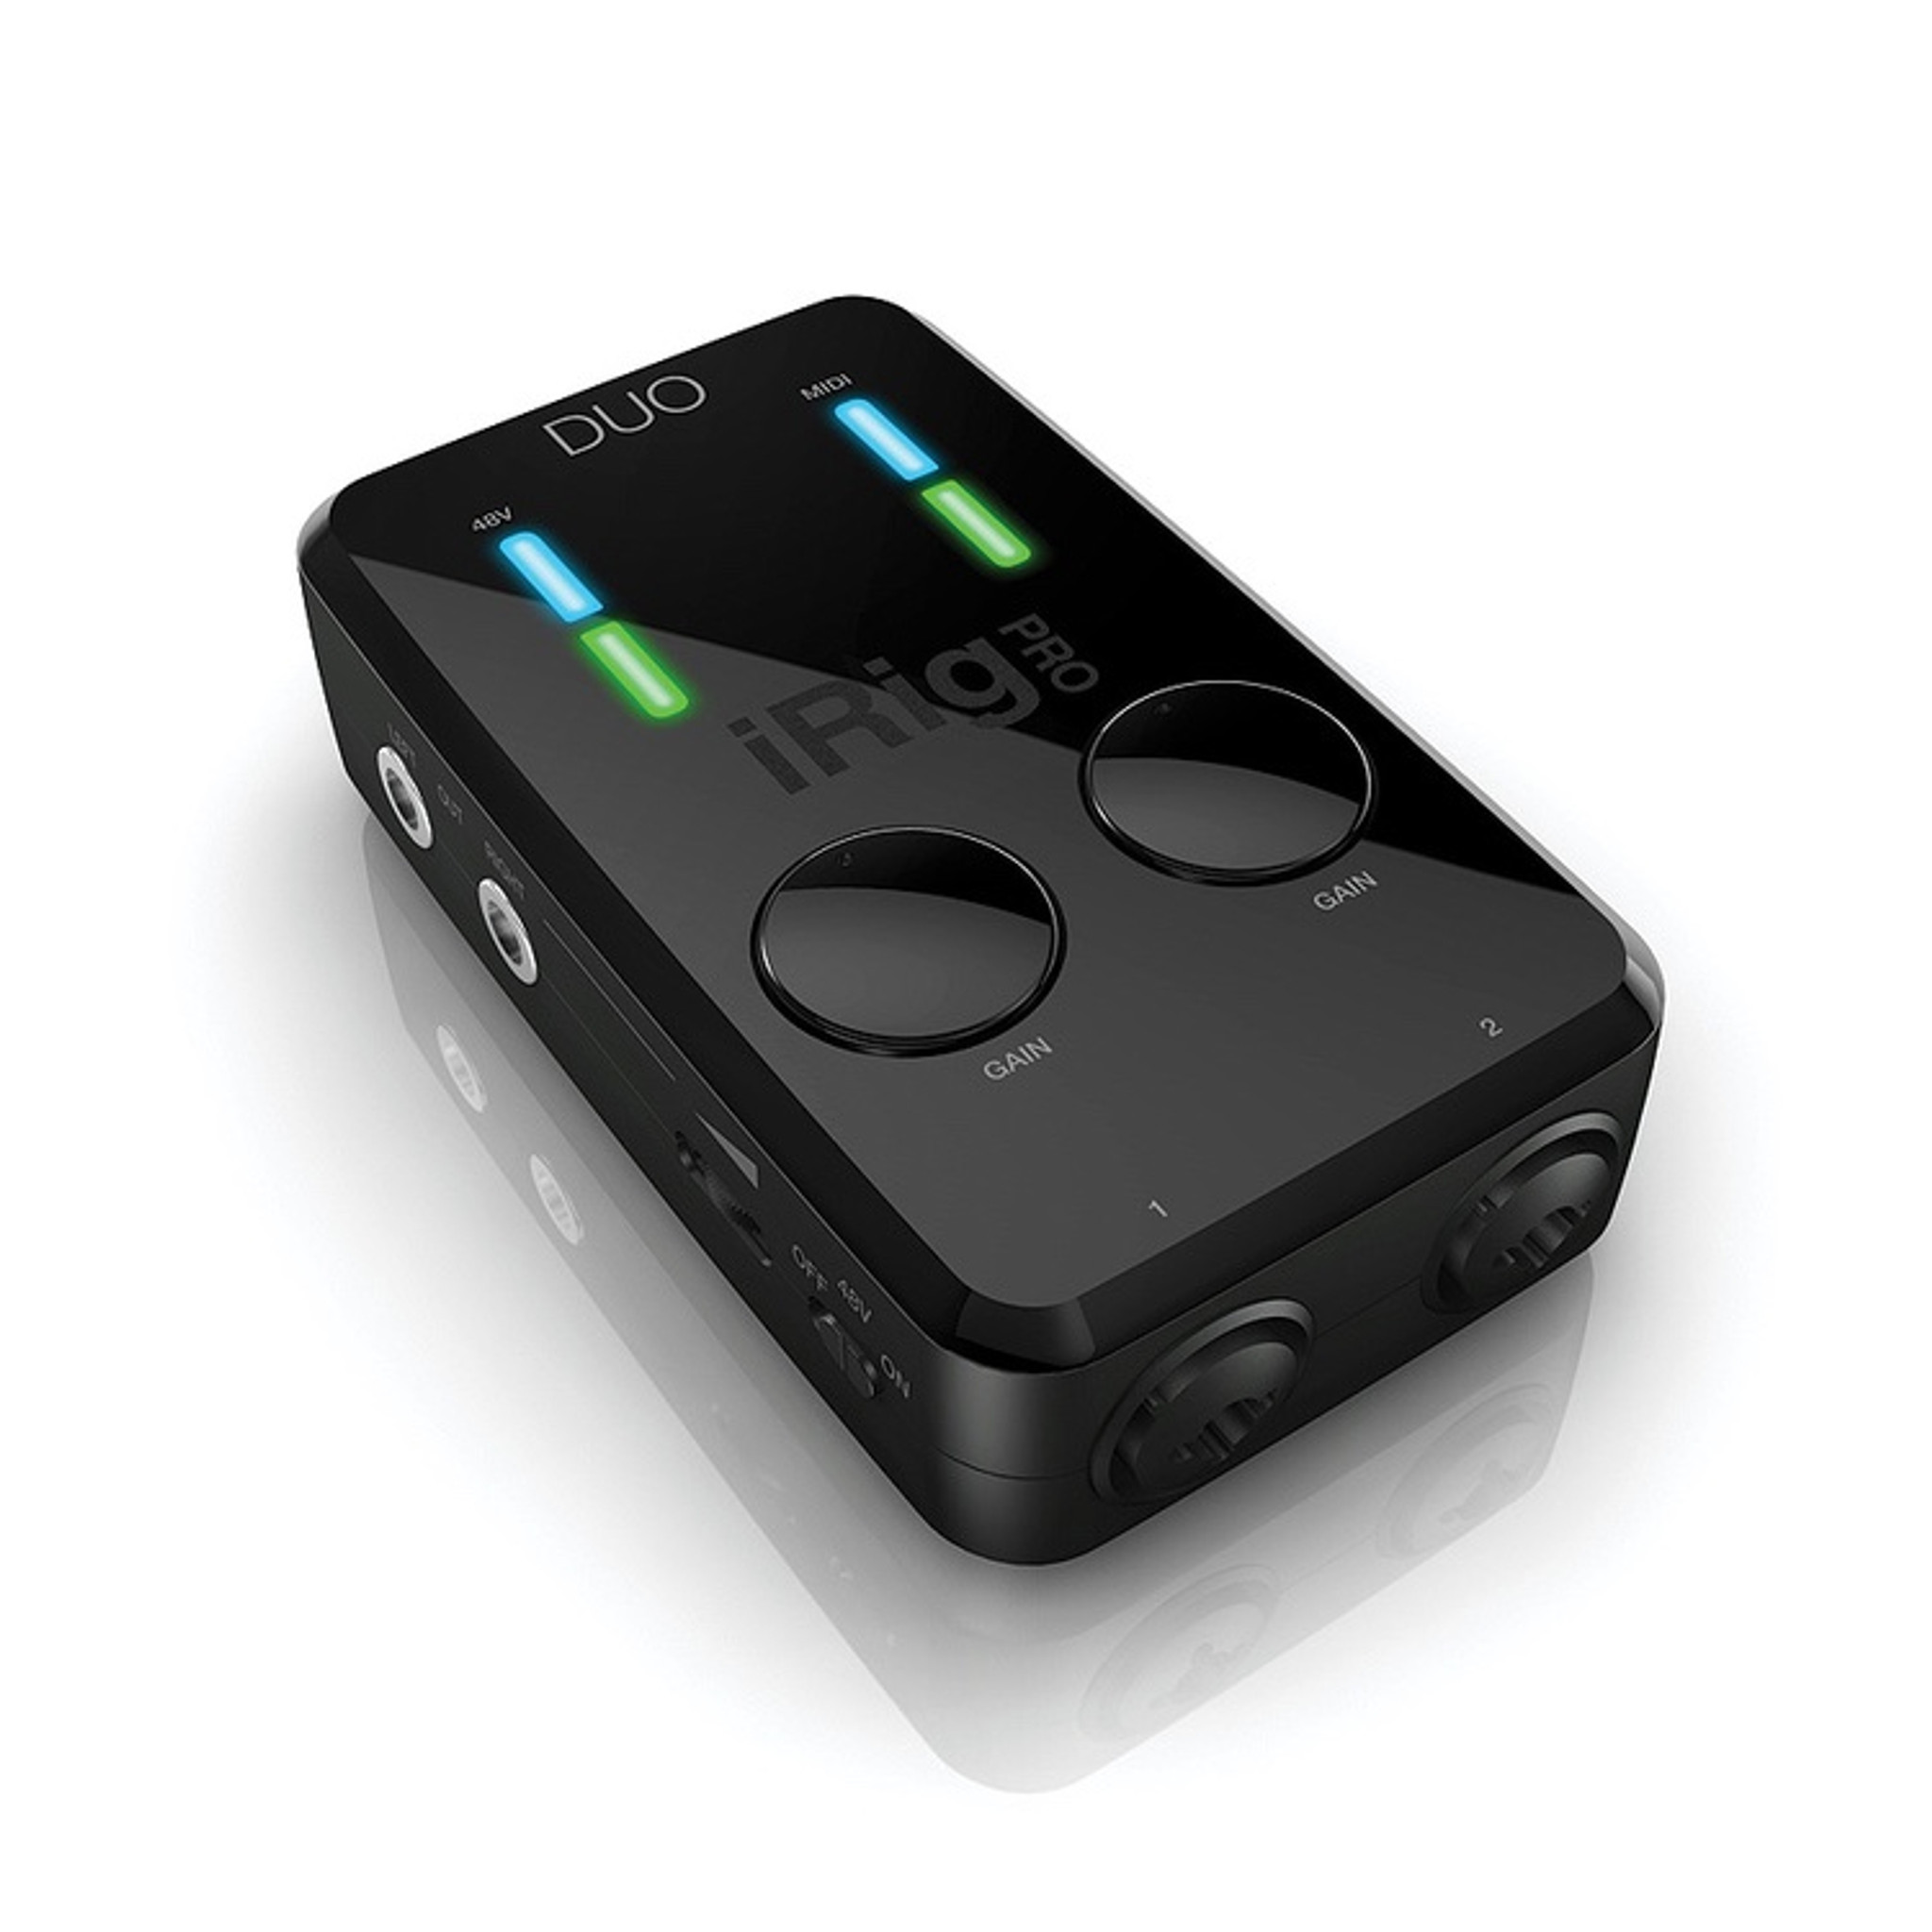 IK Multimedia iRig Stream Pro iOS Audio Interface for iOS, Mac and Select  Android Devices